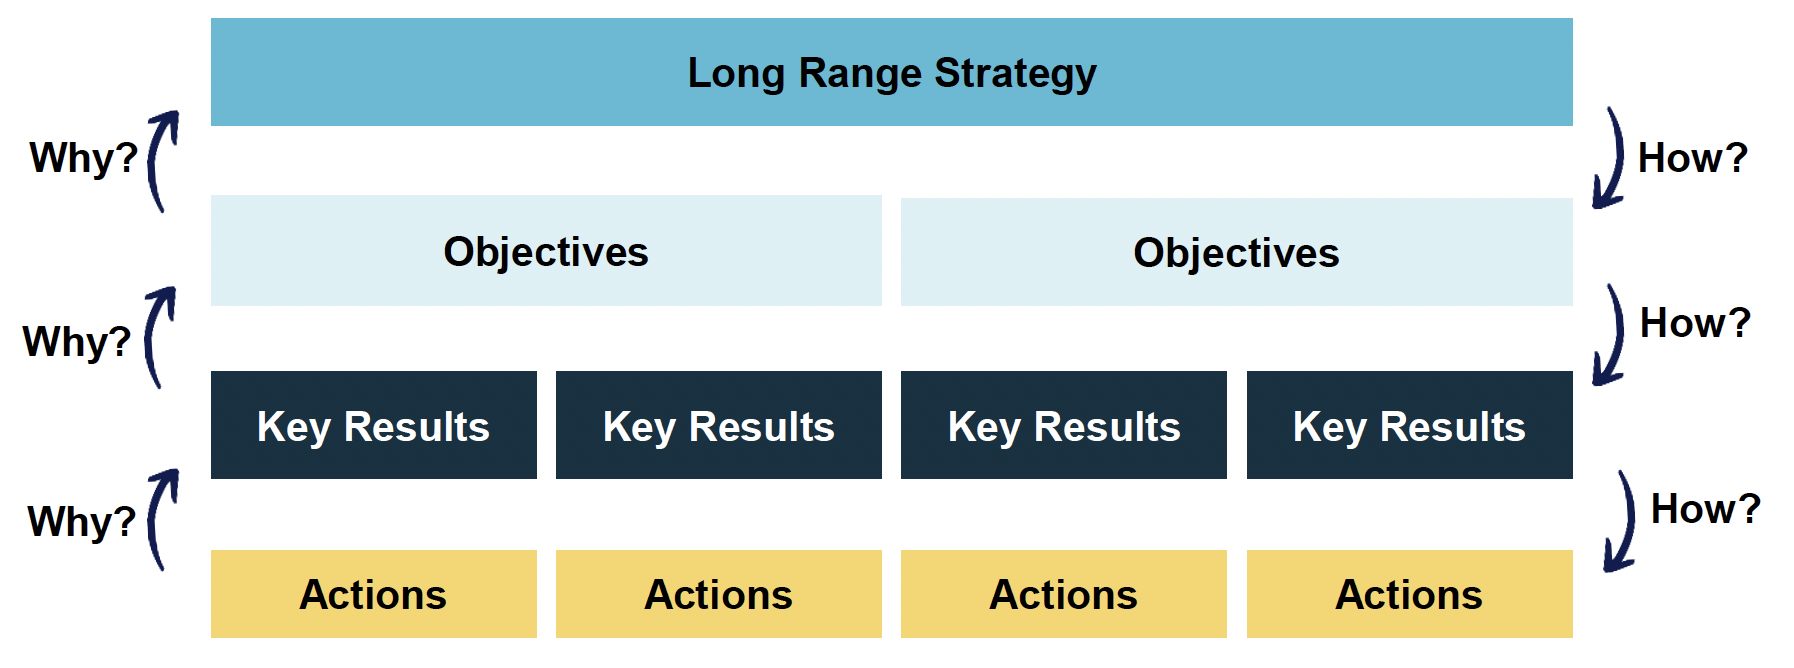 OKRs Long Range Strategy graphic explaining that Actions explain the "why" to the Key Results and Objectives, while Objectives and Key Results explain the "How" to Actions